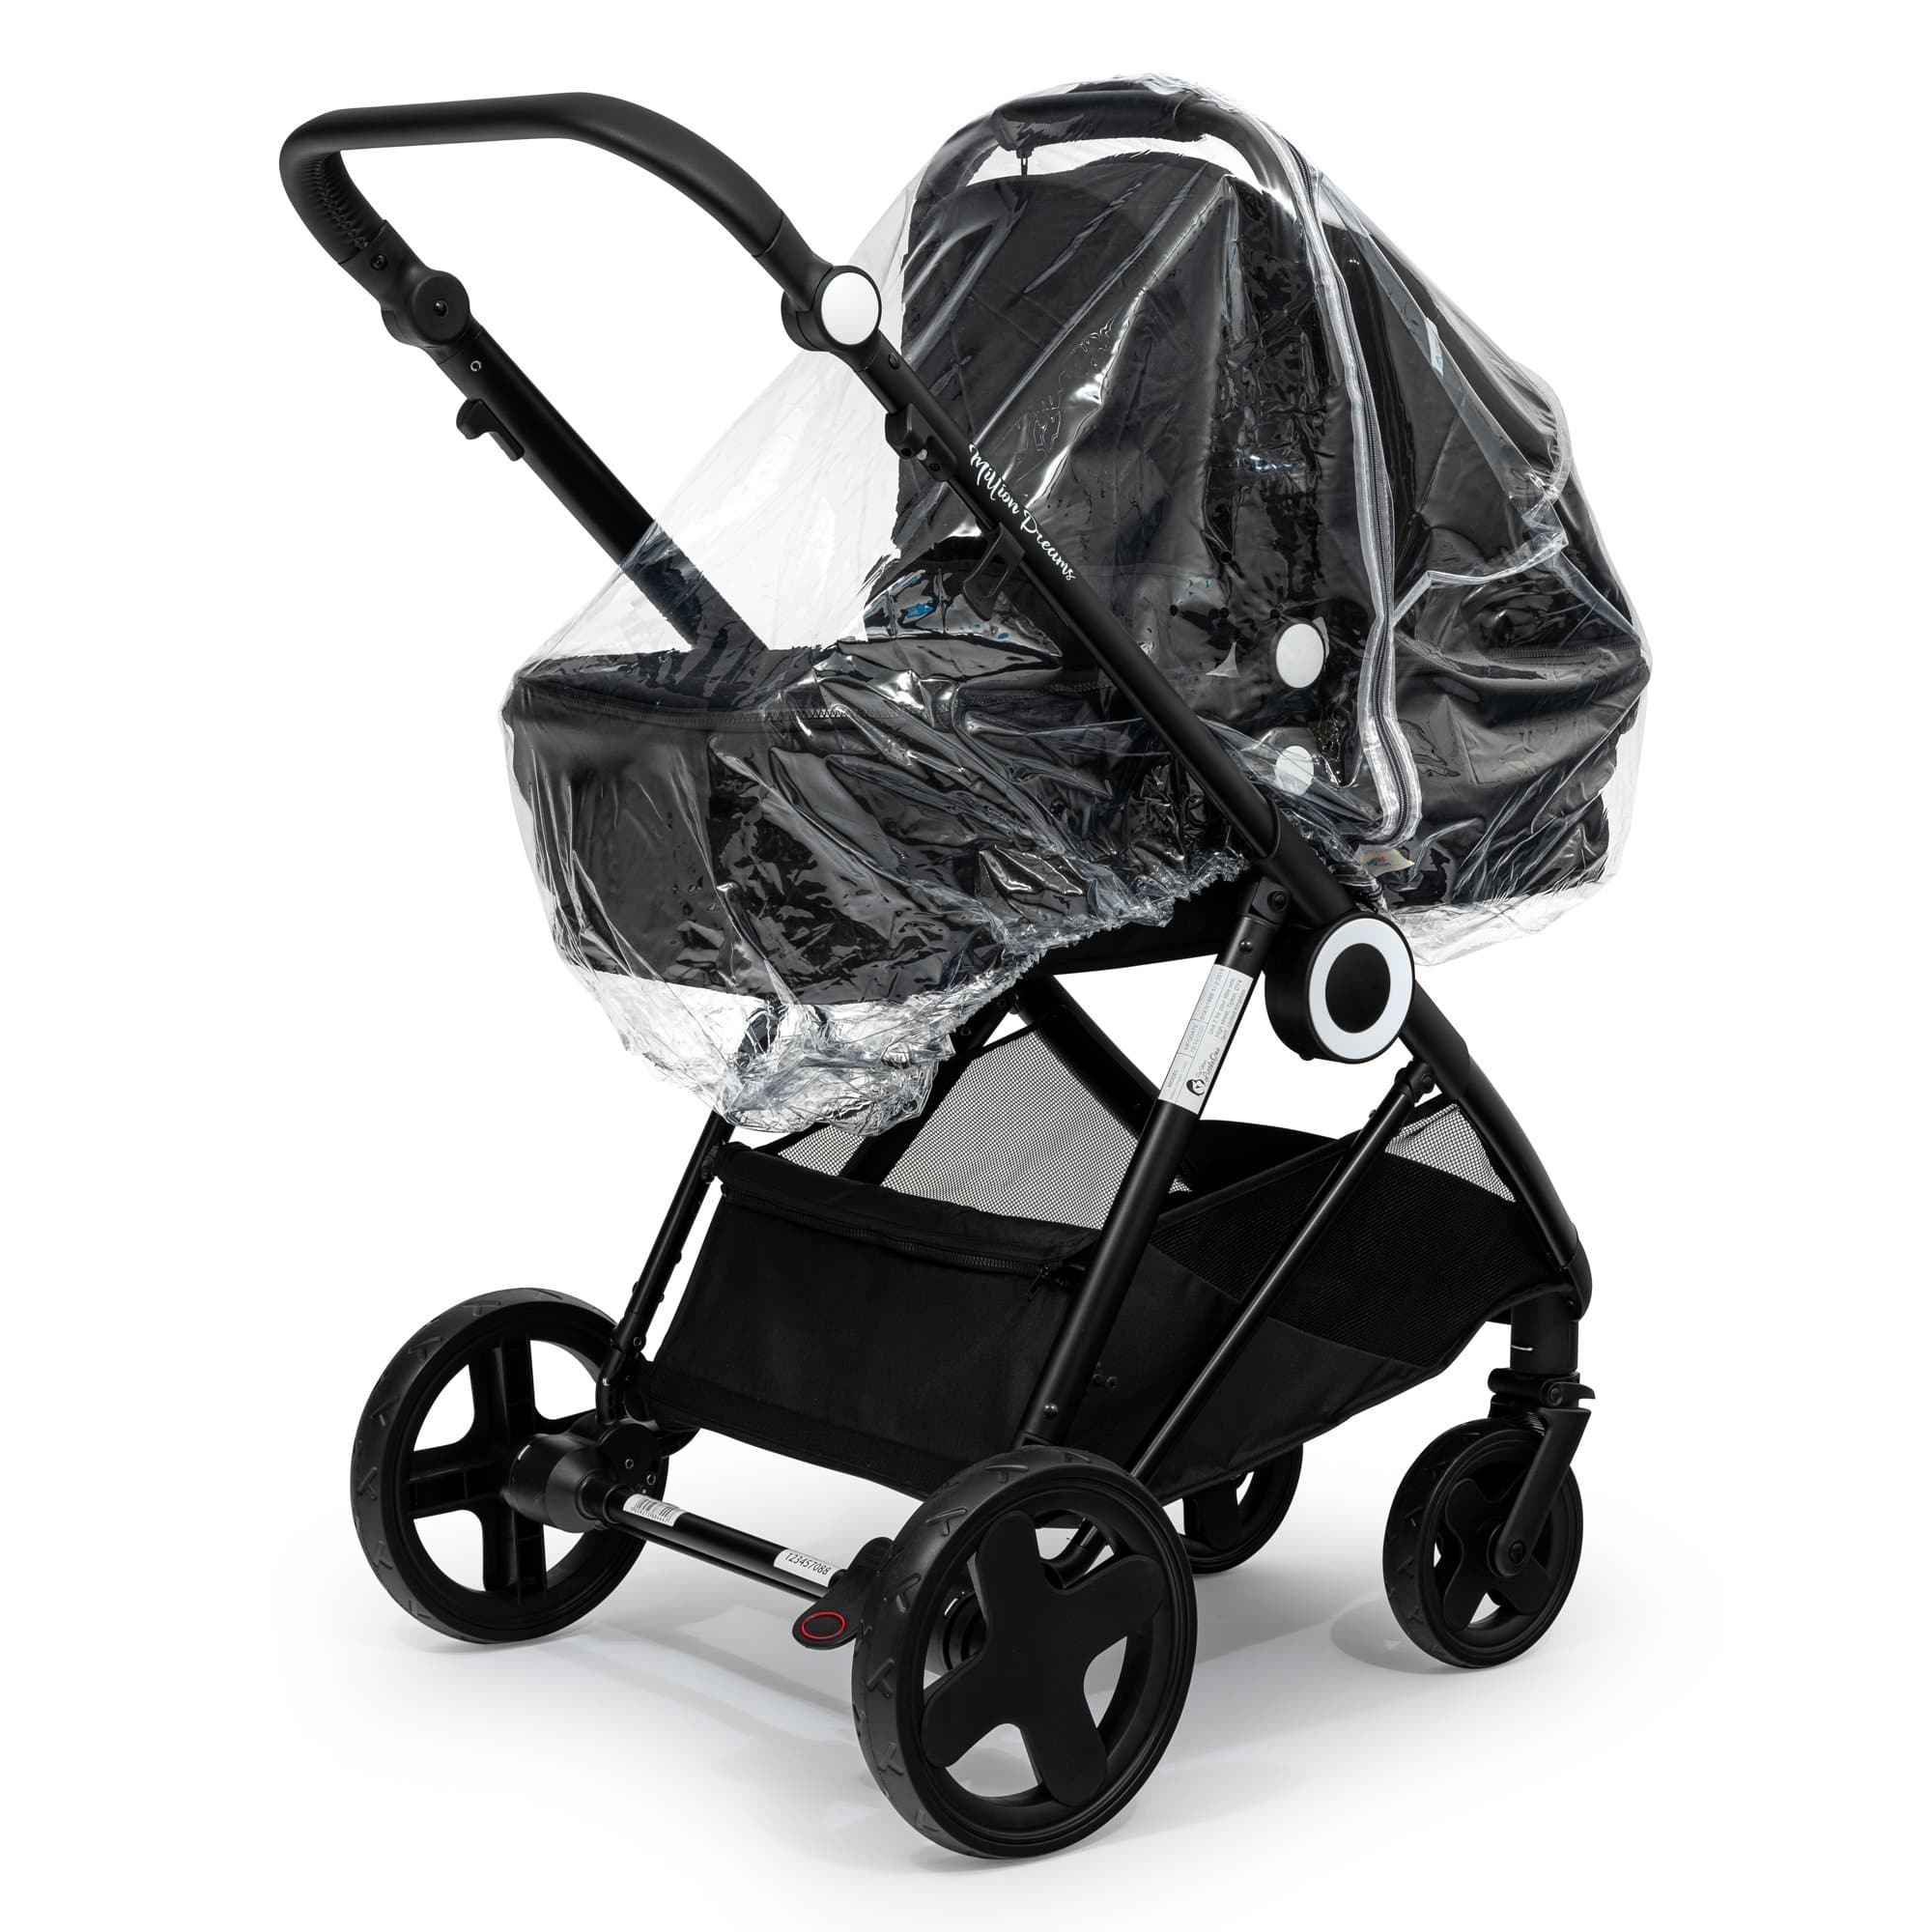 2 in 1 Rain Cover Compatible with Norton - Fits All Models - For Your Little One